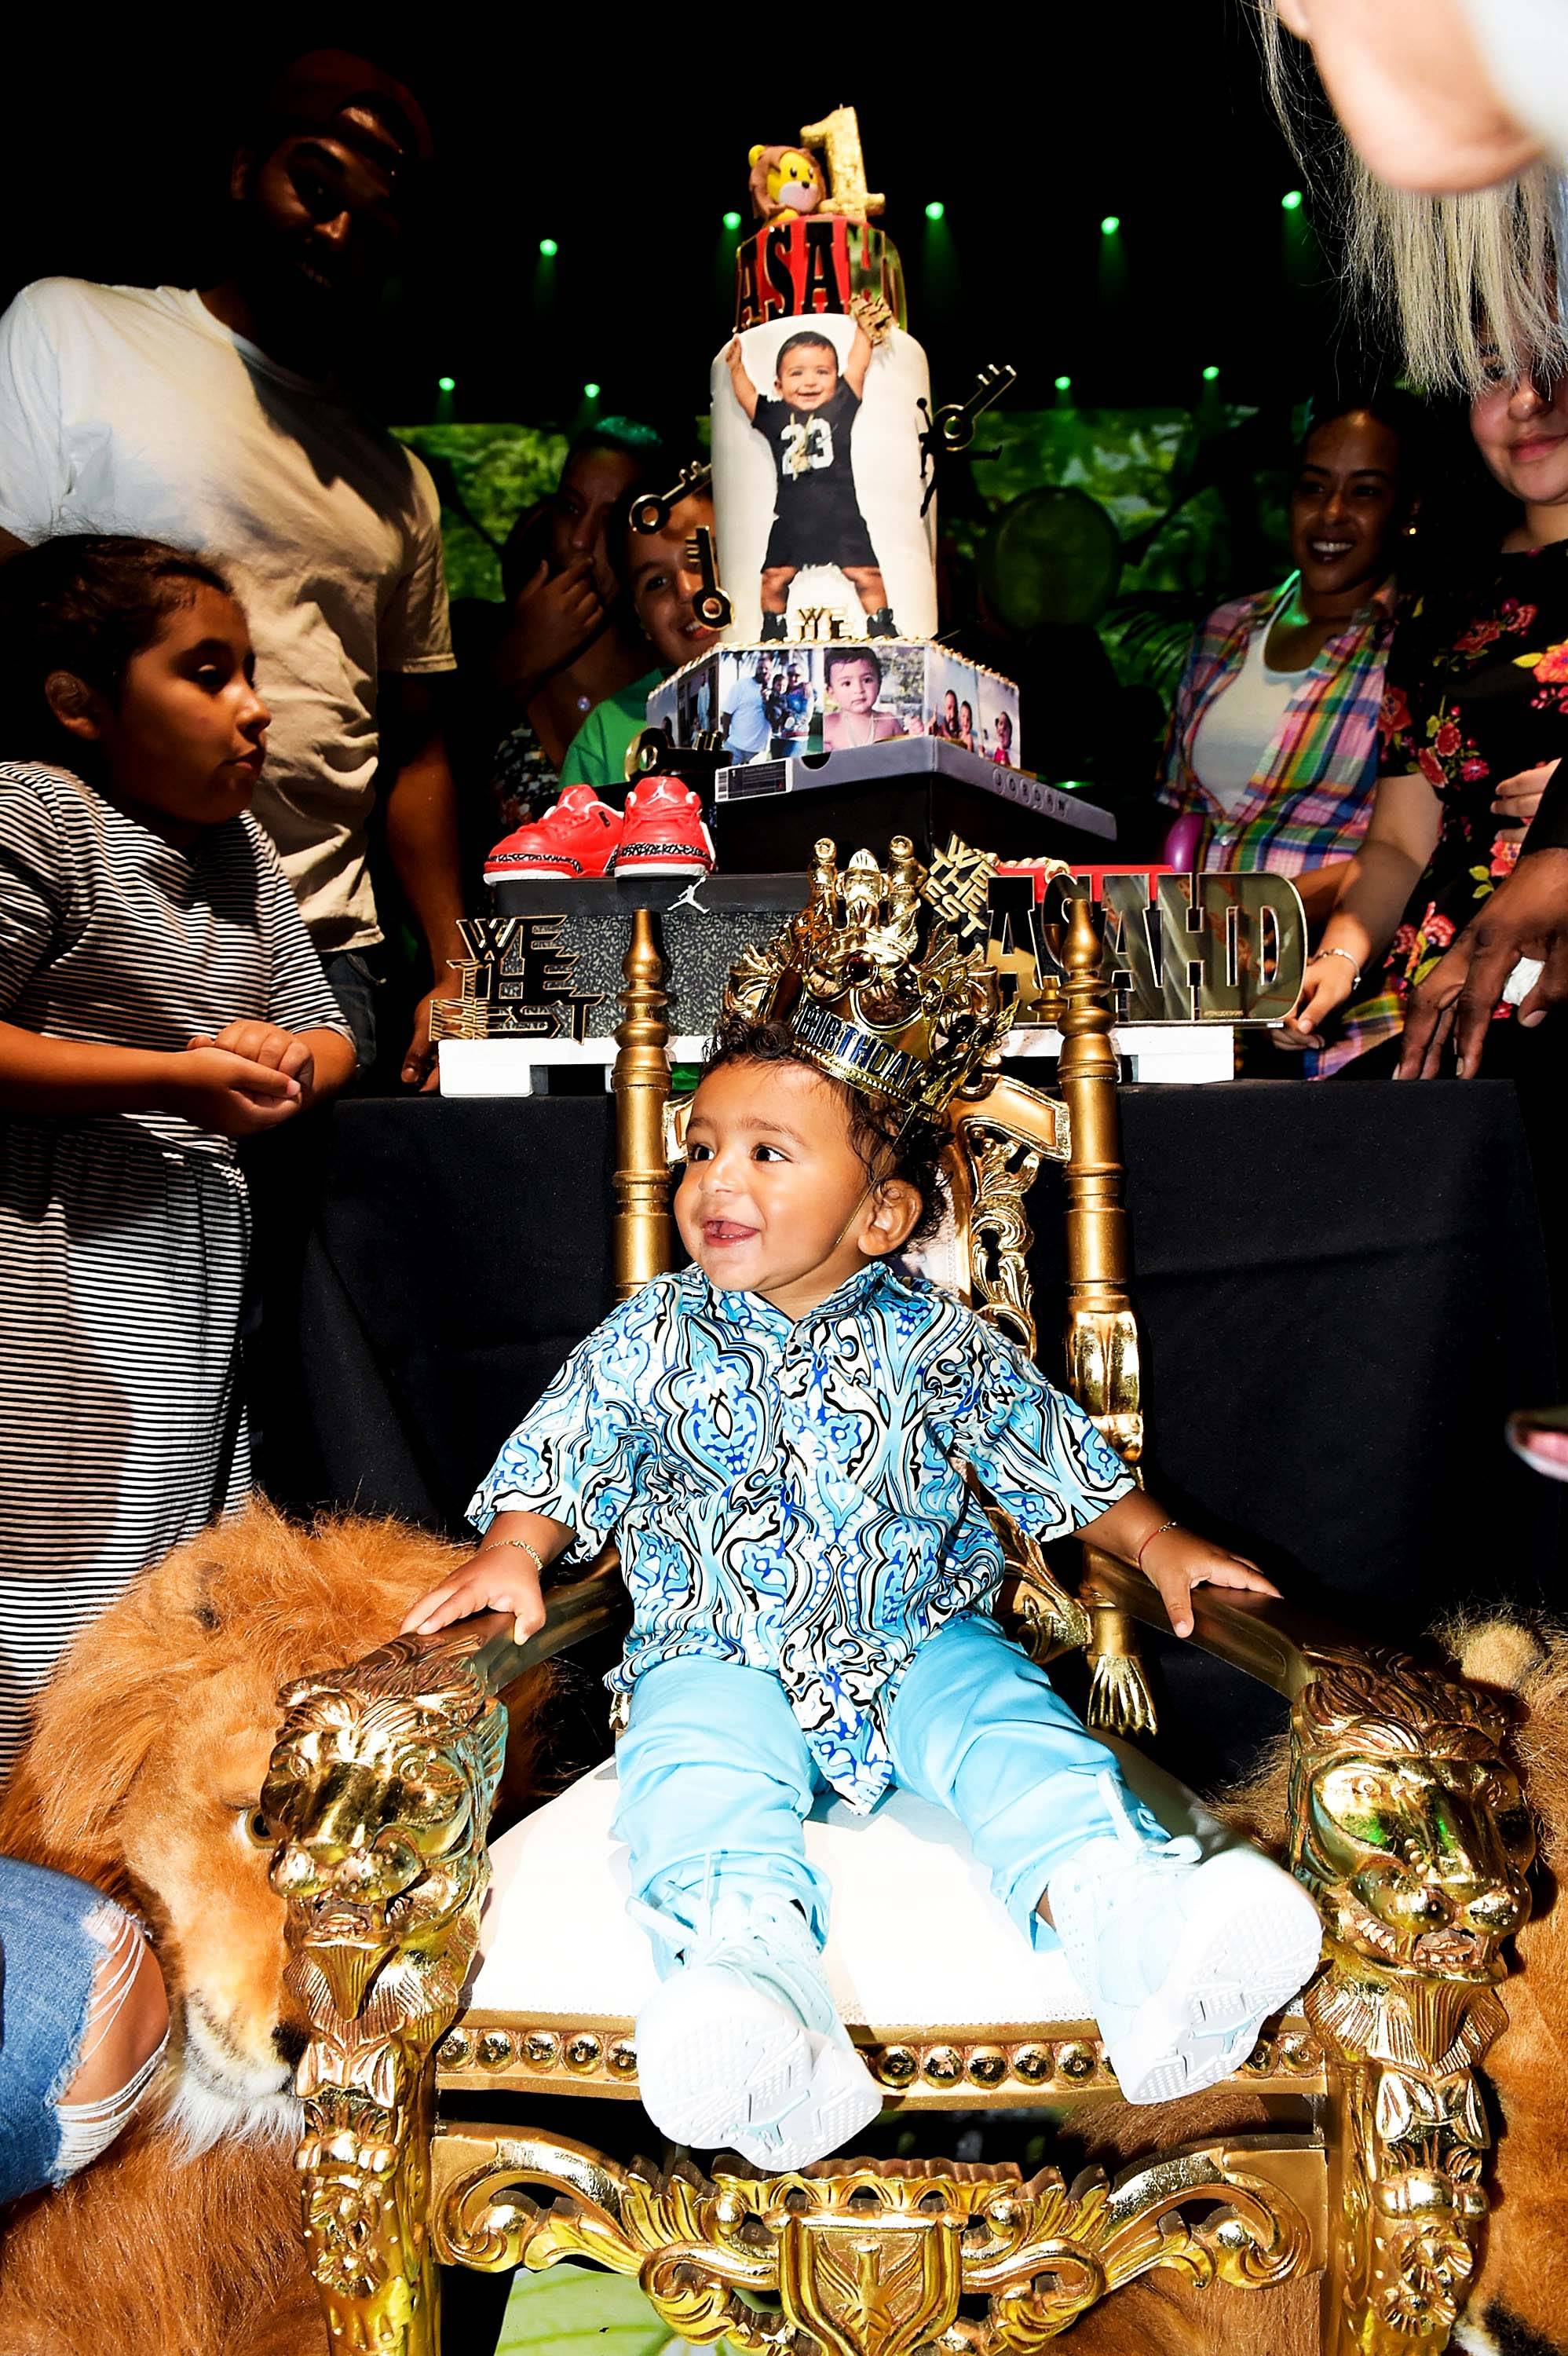 Haute Living & We The Best's DJ Khaled Birthday With PLACES.CO